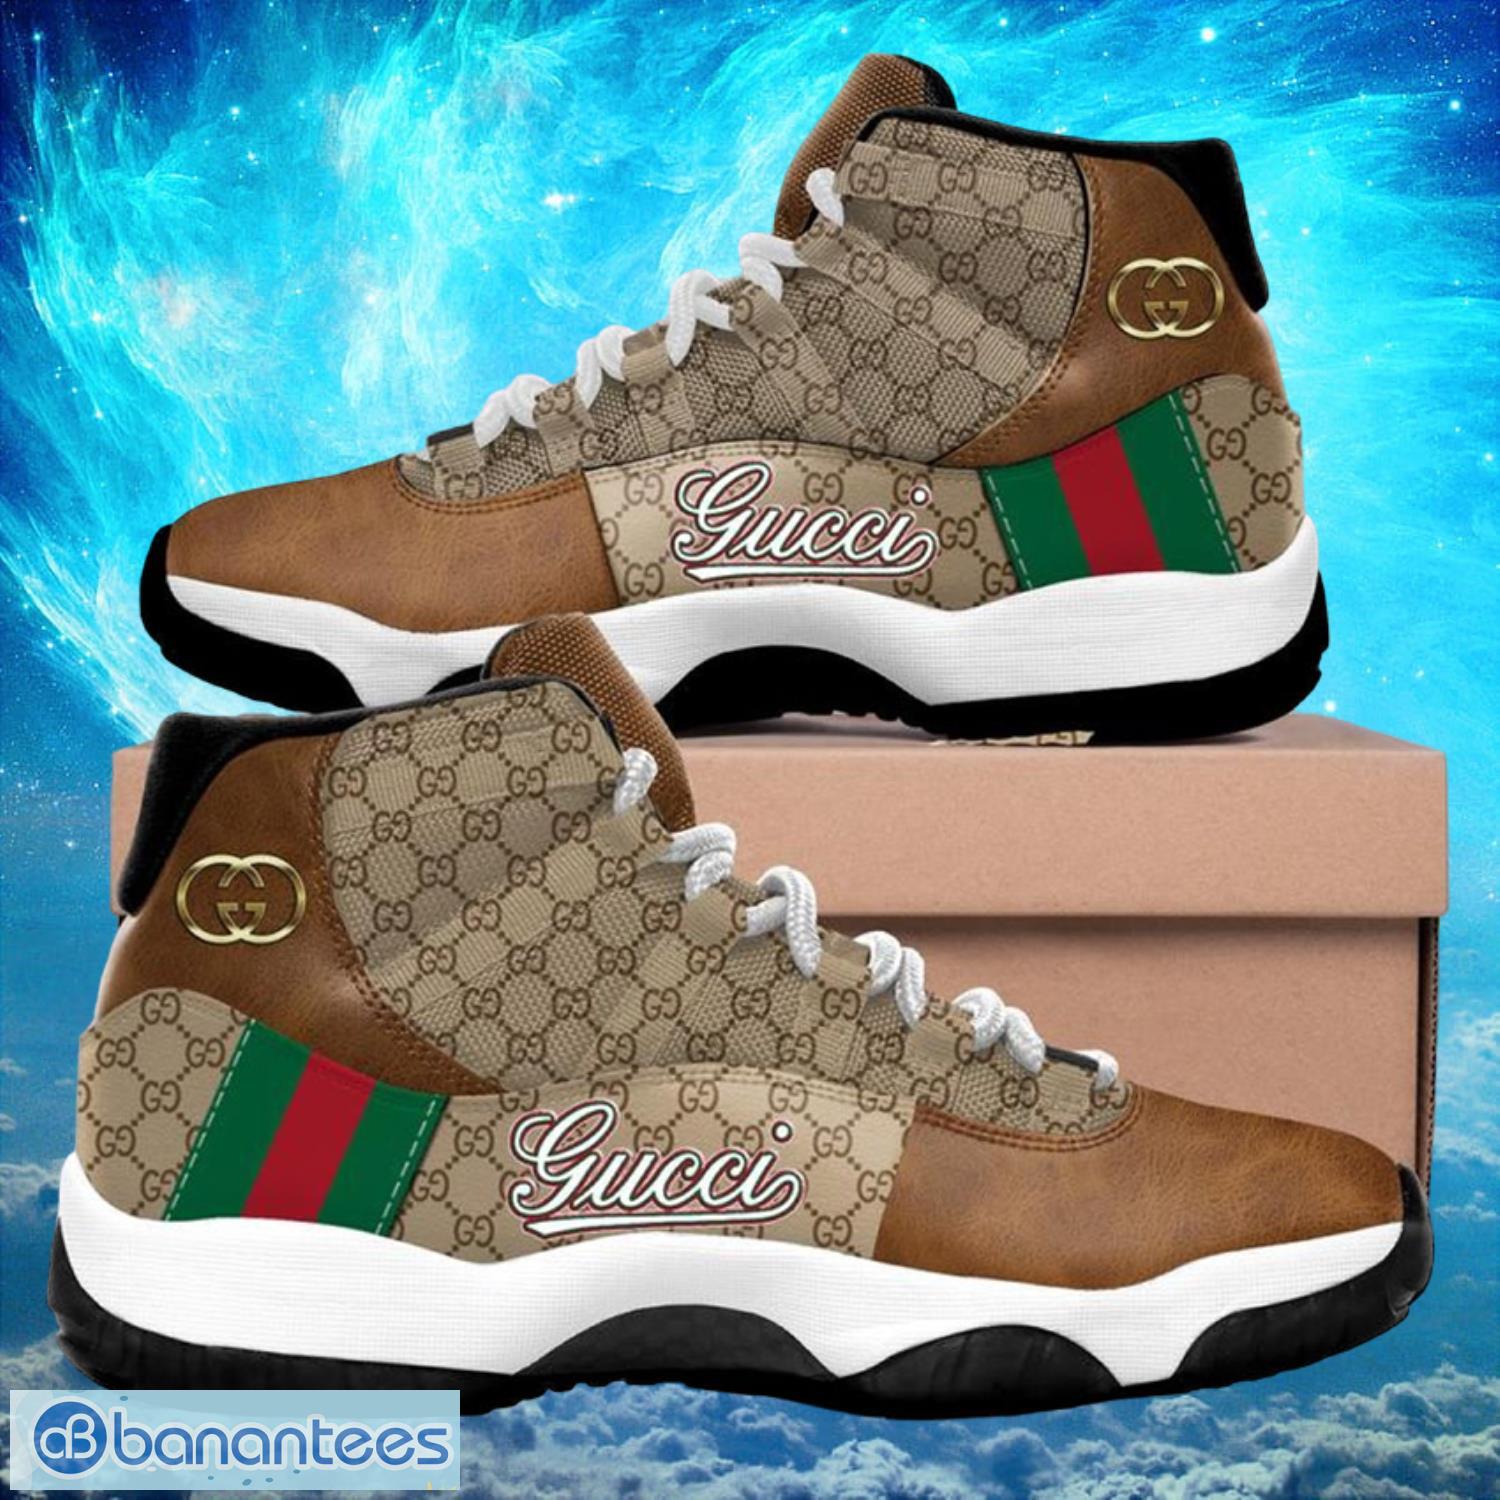 Gucci Italian Luxury Brown Air Jordan 11 Sneakers Shoes Gift For Fans Product Photo 1